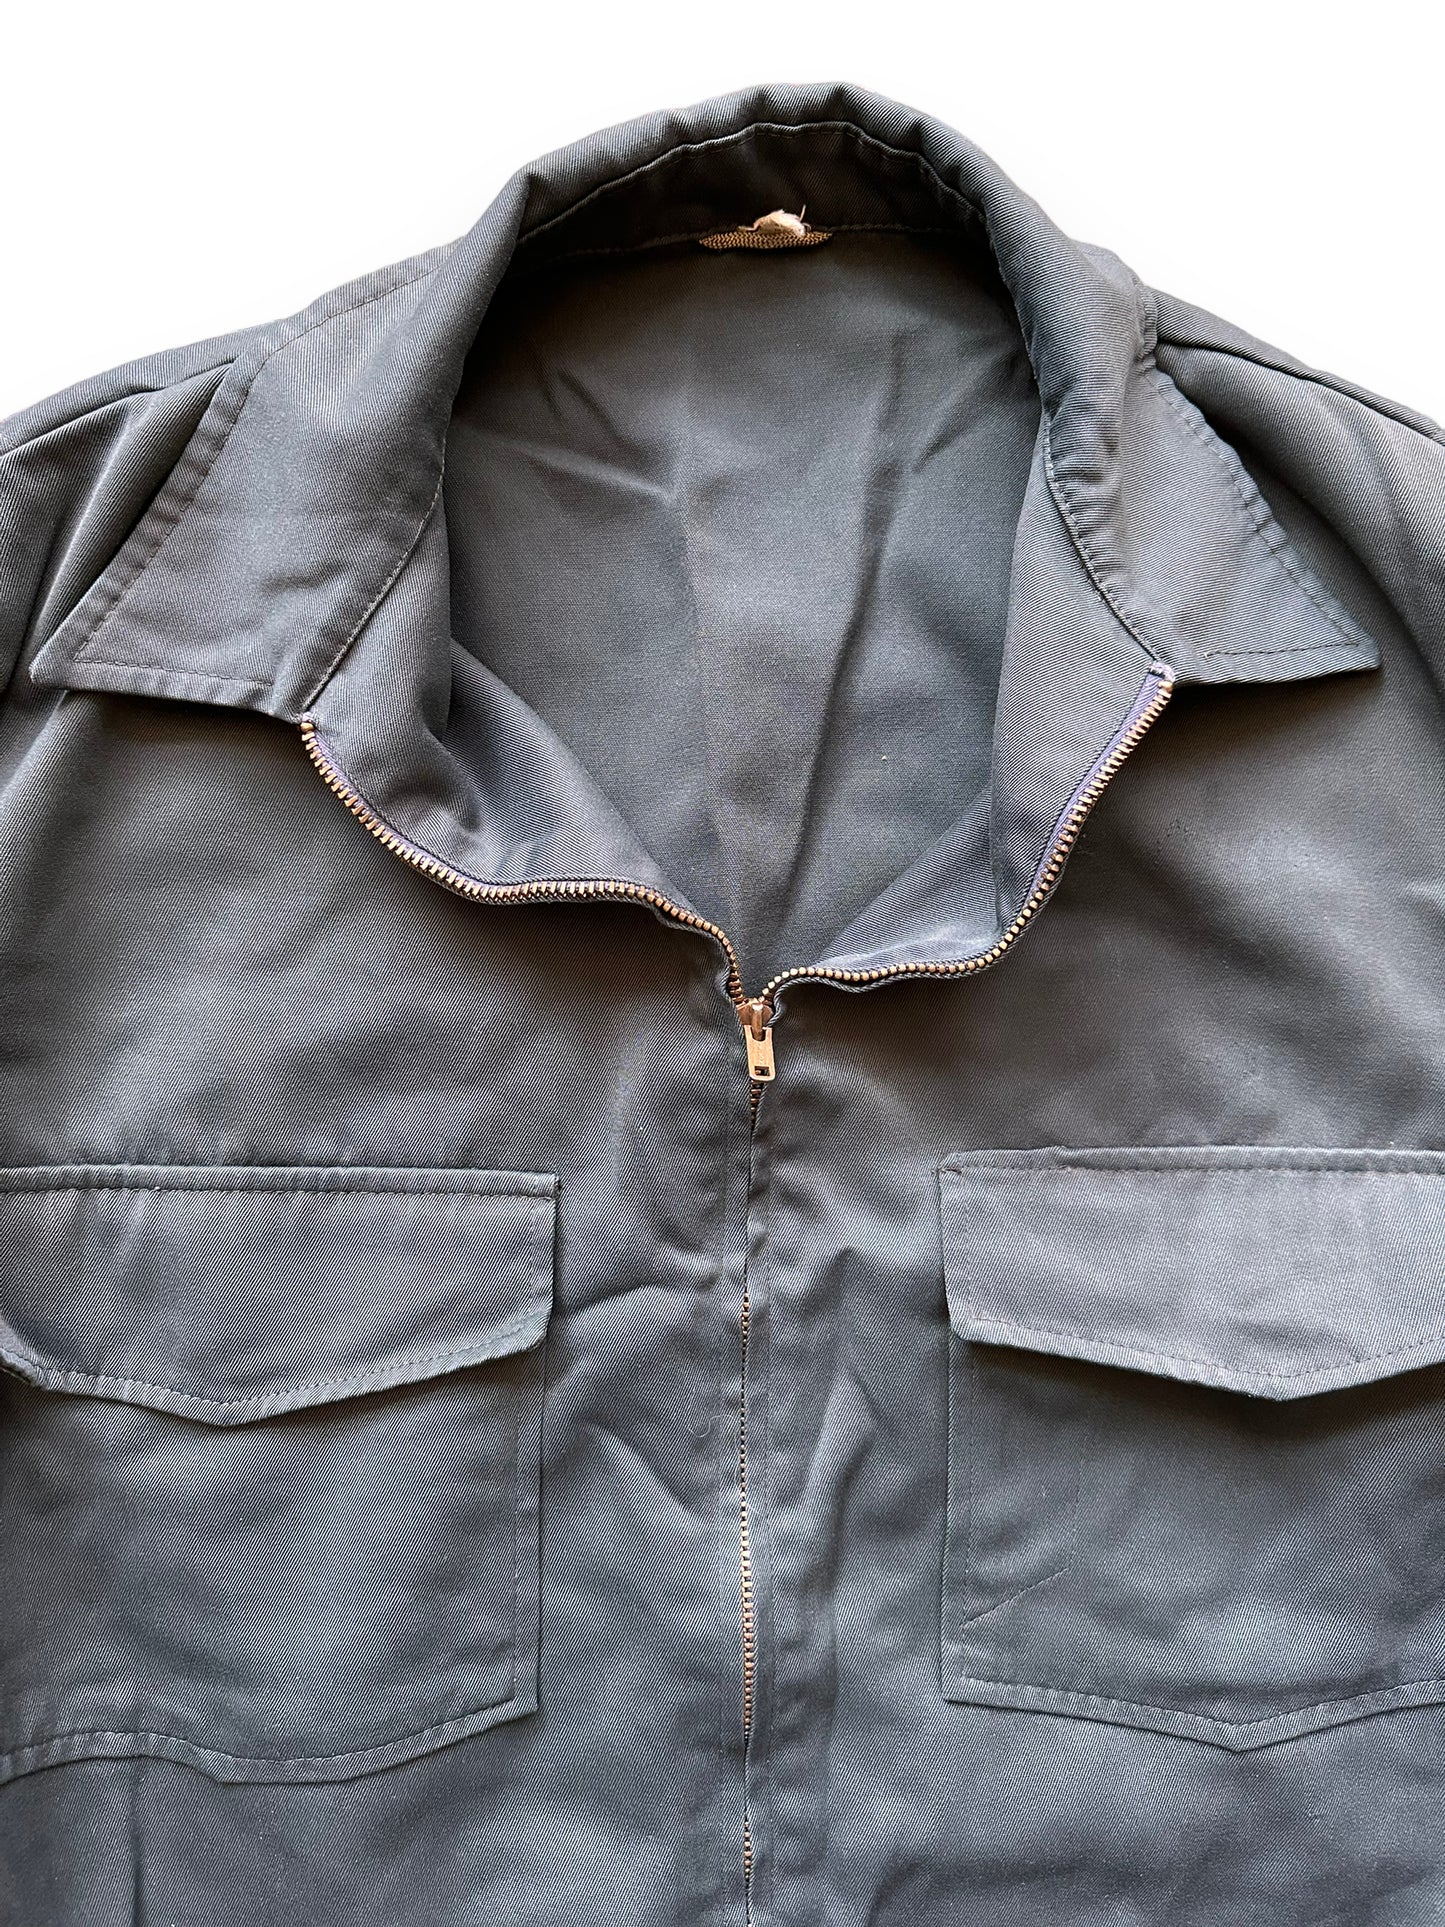 Collar View of Vintage Day's Gas Station Jacket SZ 42 | Vintage Workwear Jacket Seattle | Seattle Vintage Clothing